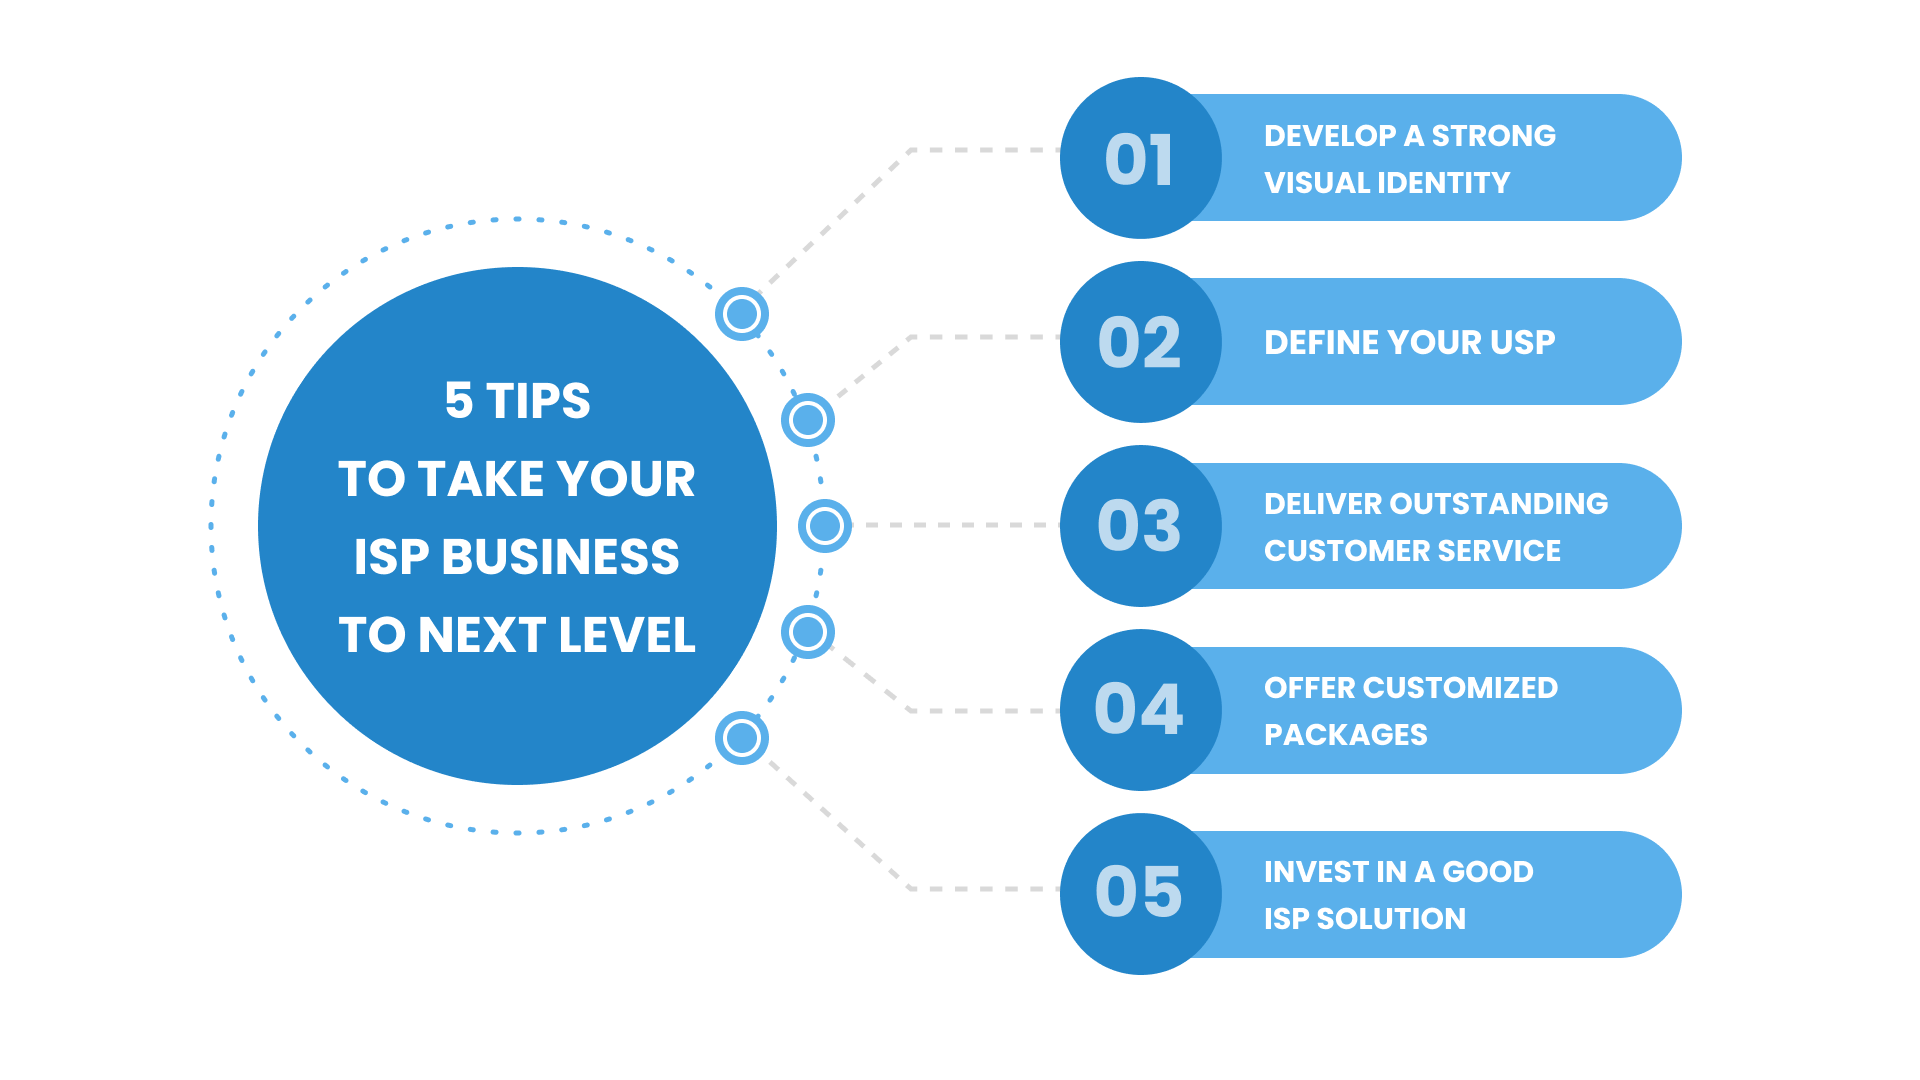 Tips To Take Your ISP Business to Next Level